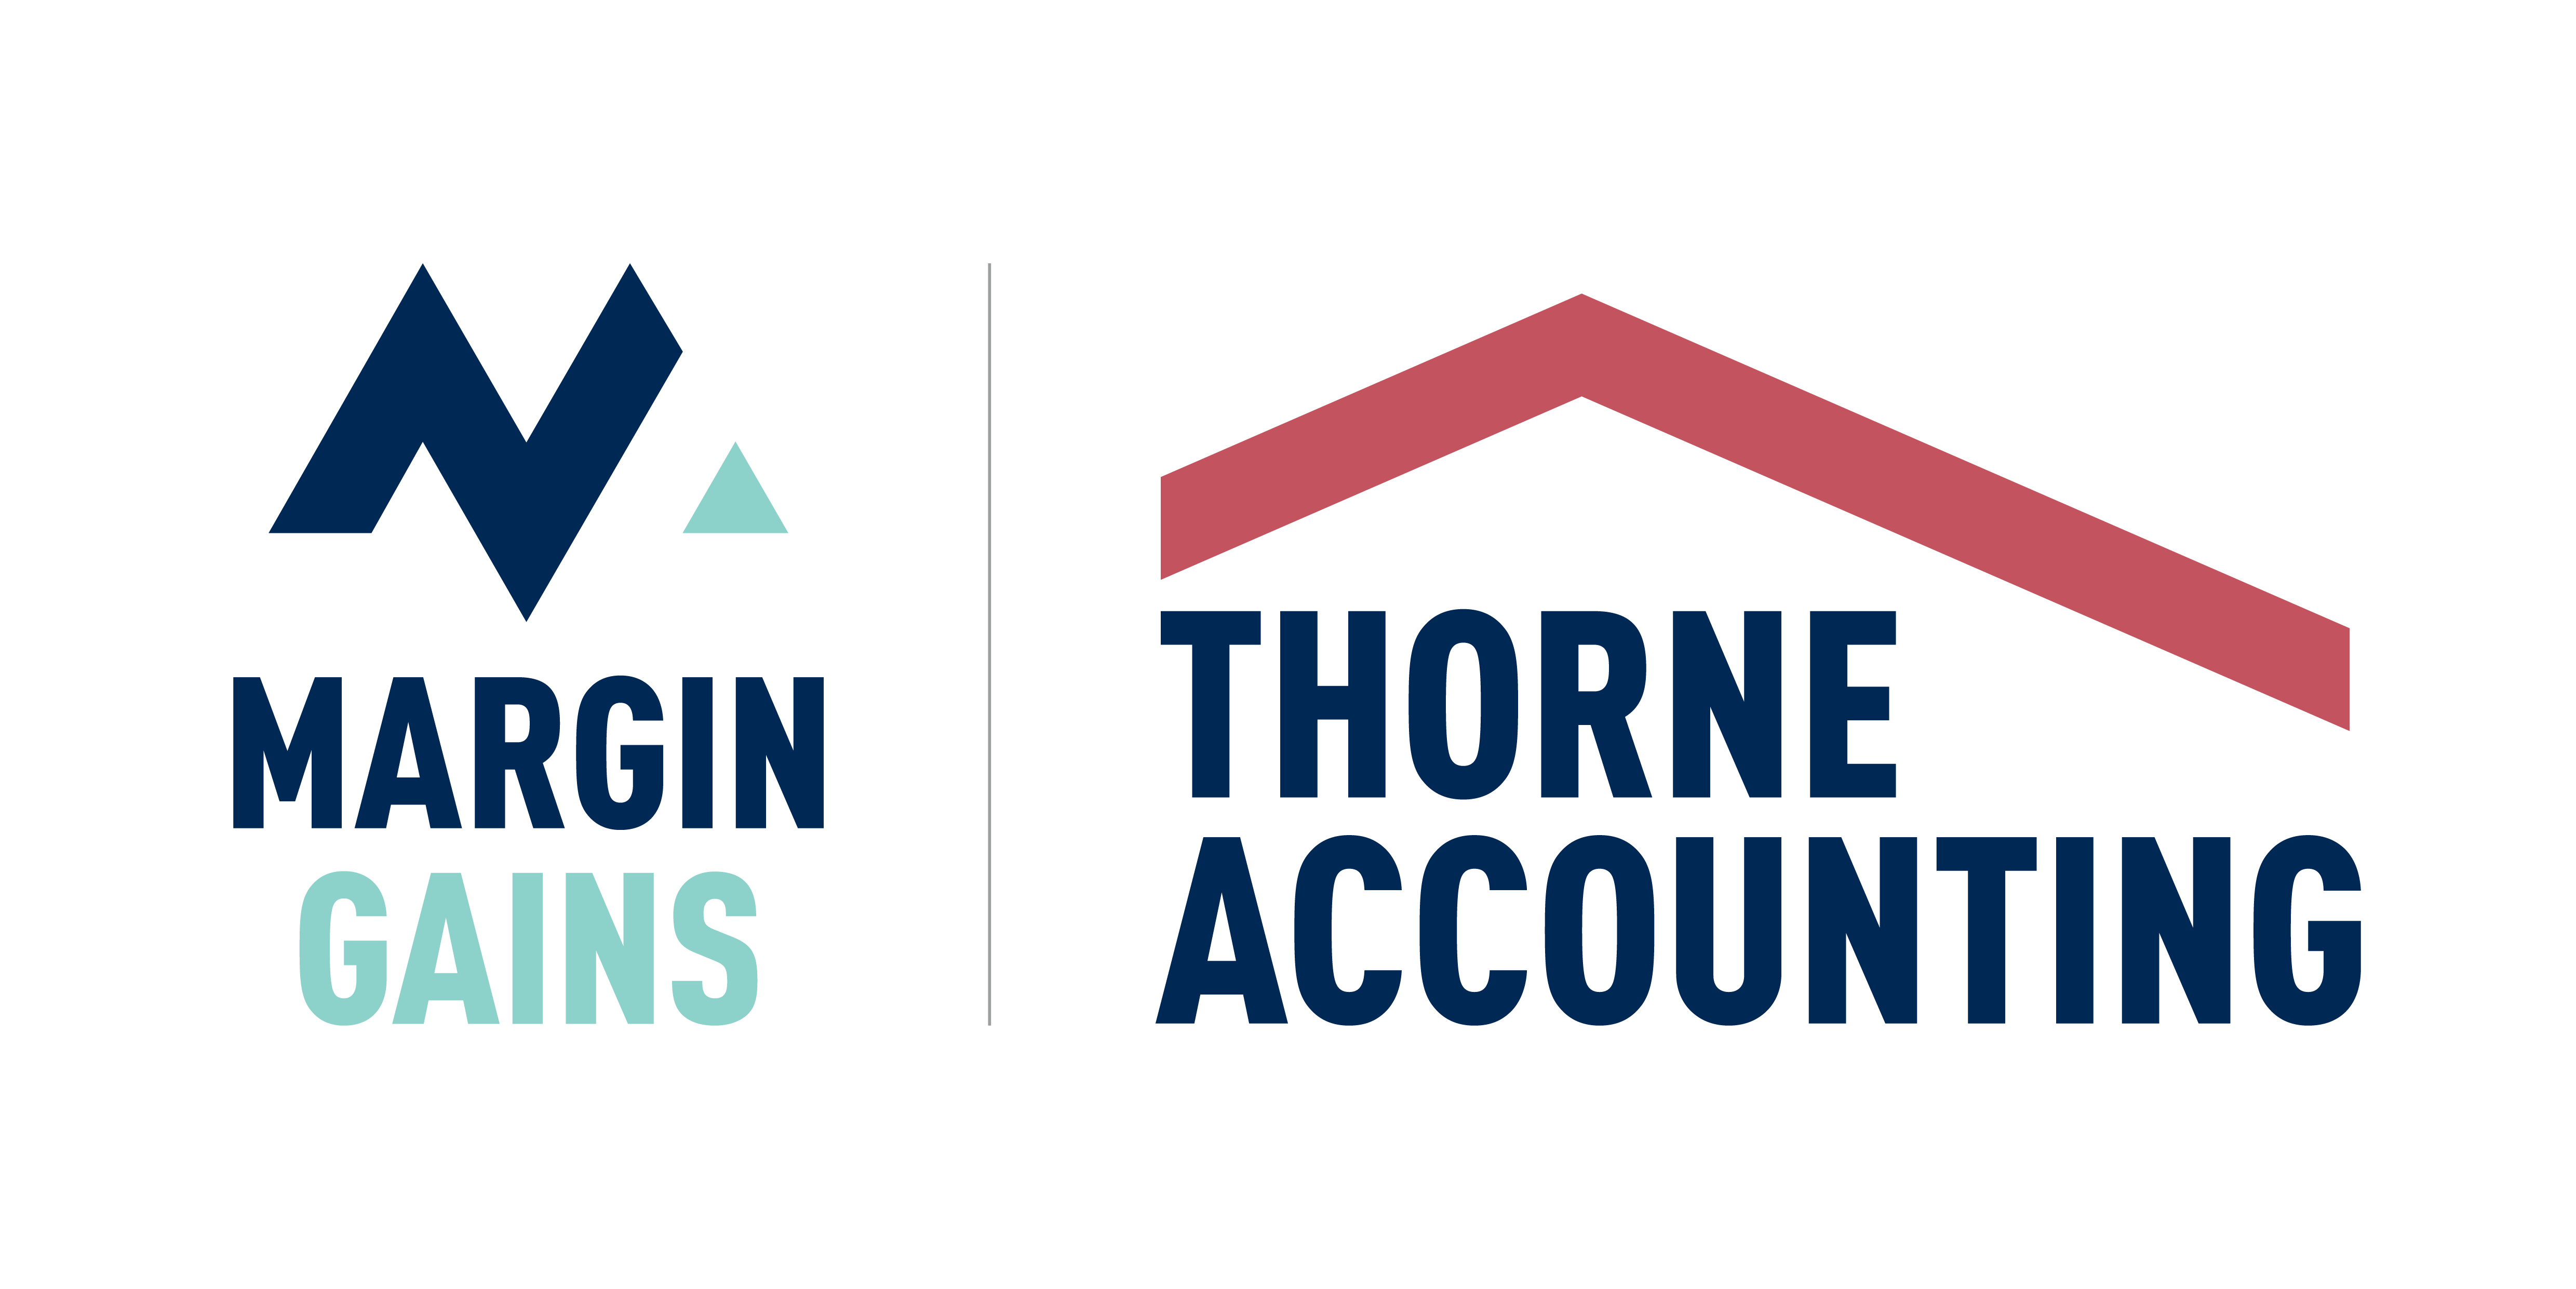 Margin Gains | Thorne Accounting - Property and business accounting professionals